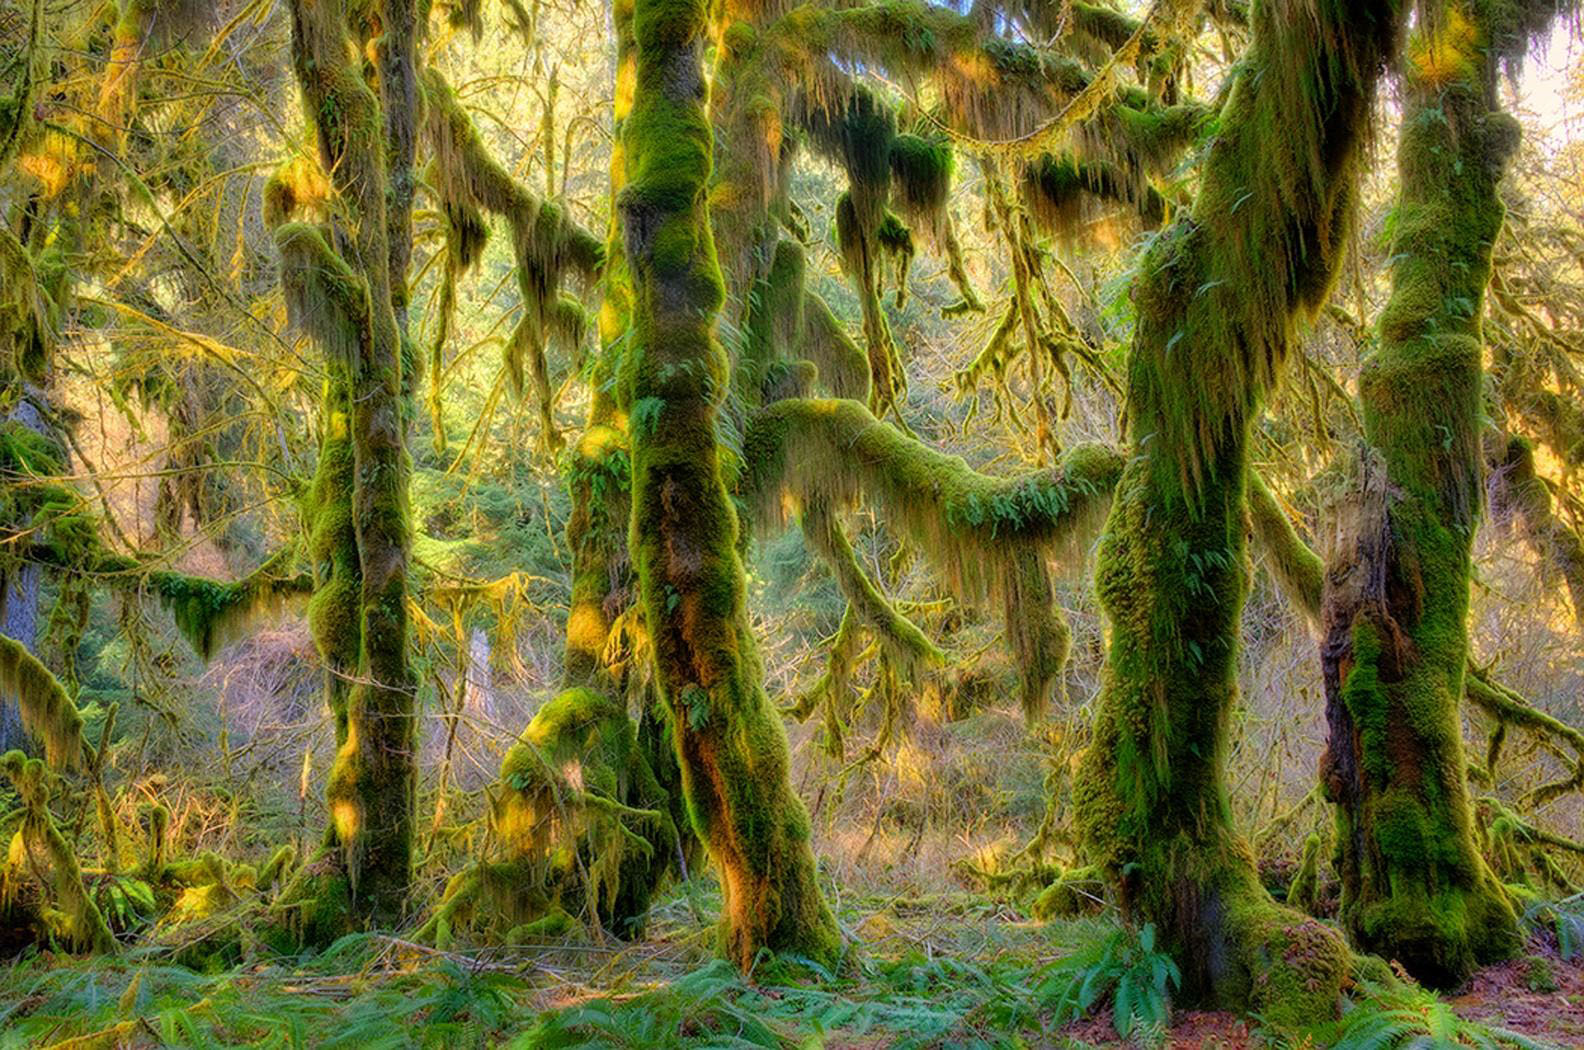 Mossy forest dappled in rays of golden sunshine